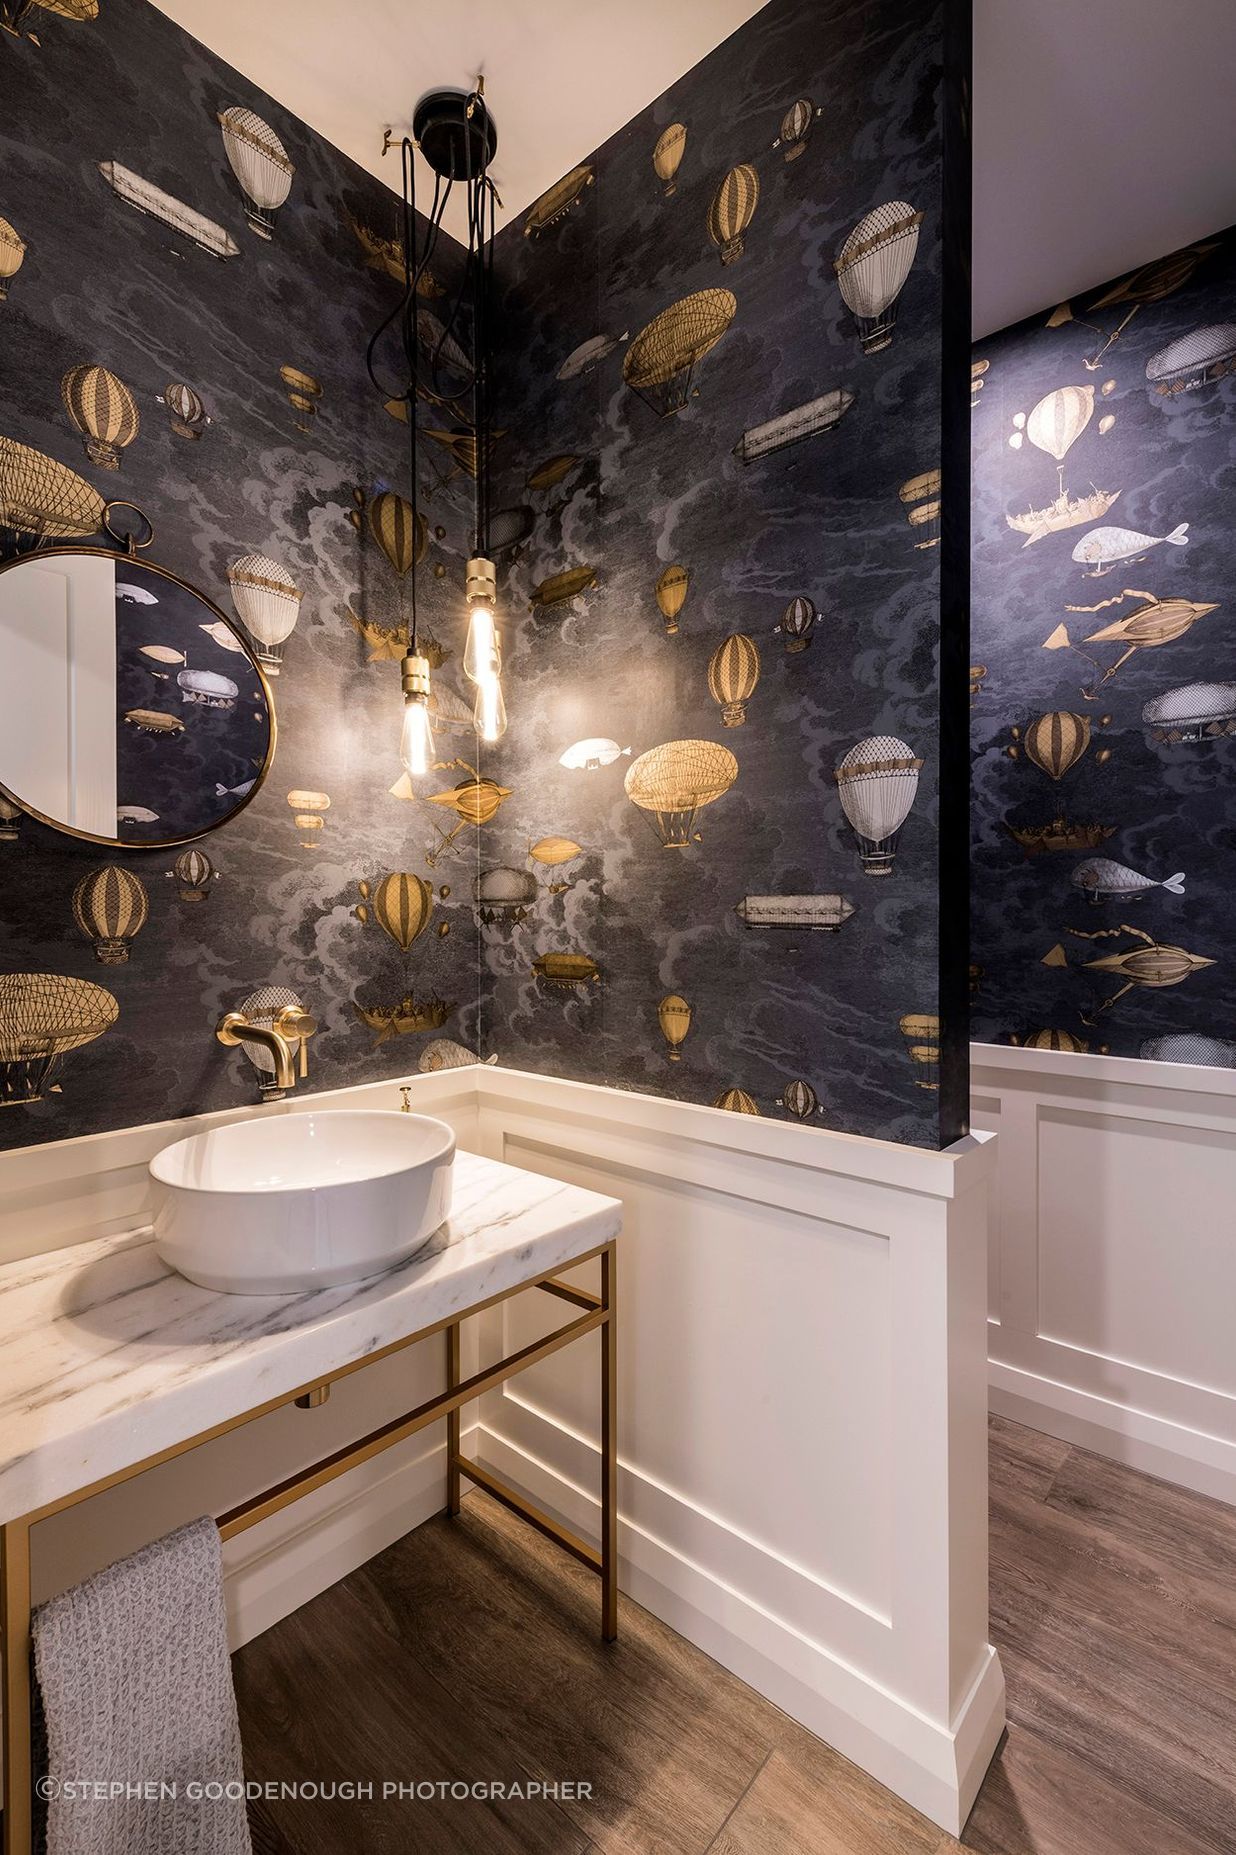 Brass and marble are elegantly used in the bathrooms.